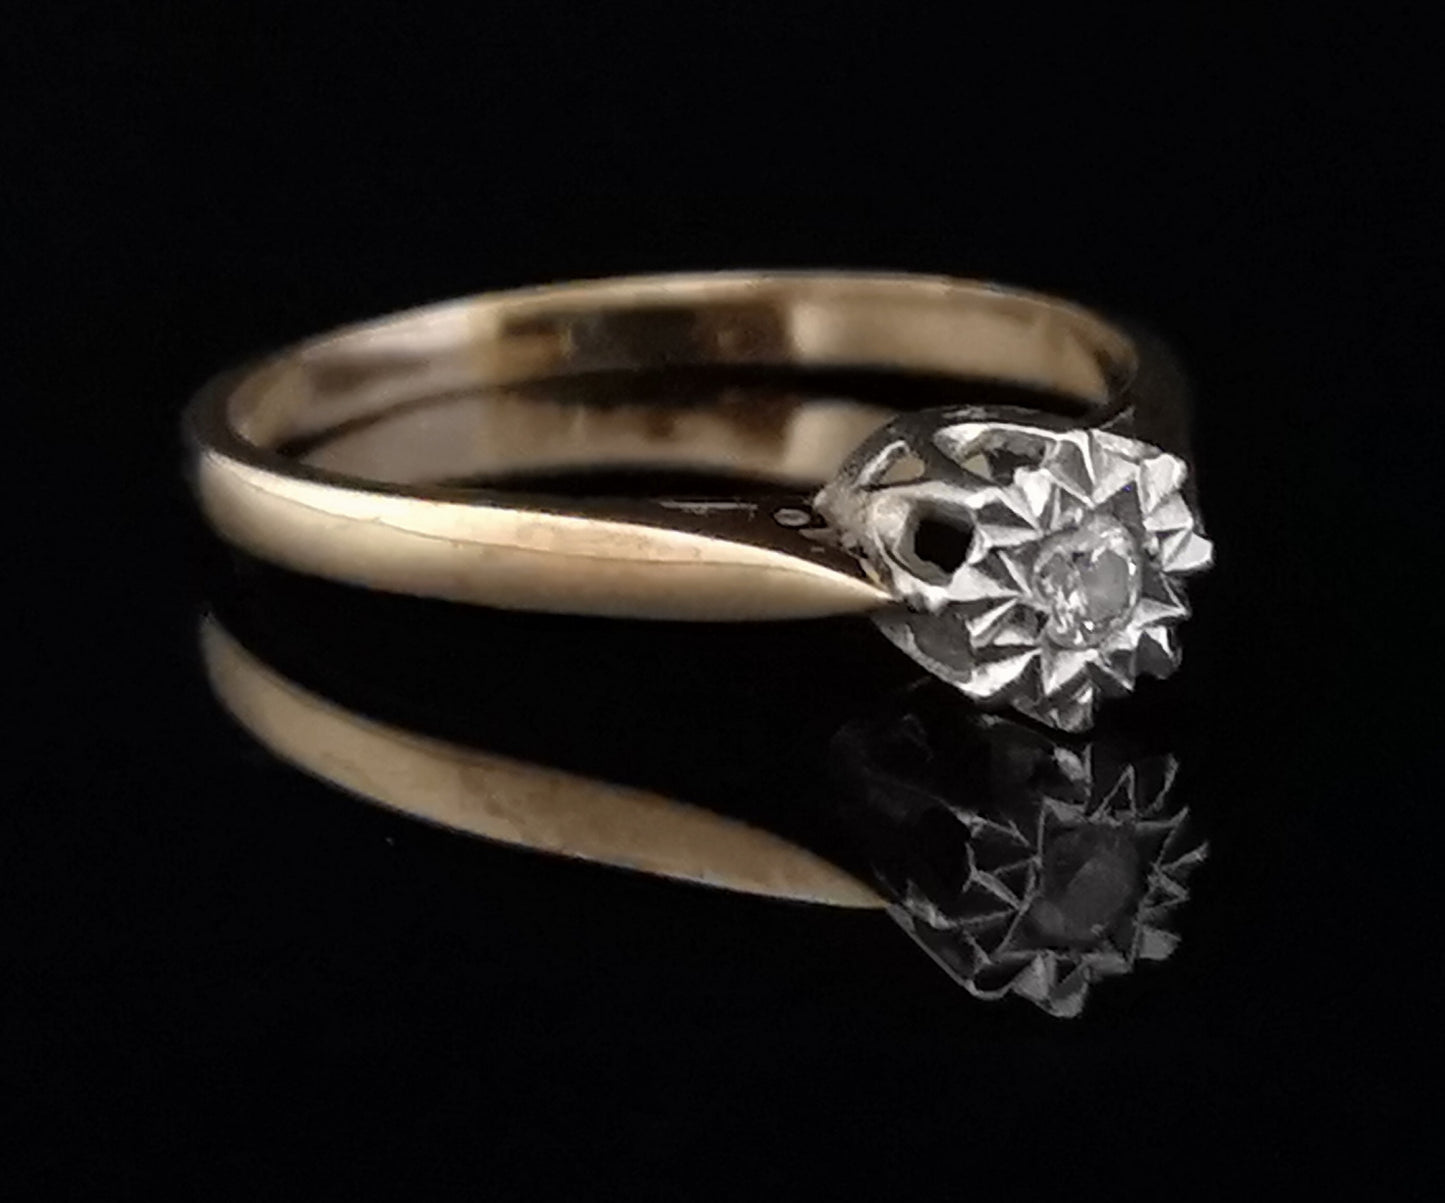 Vintage 9ct gold diamond solitaire ring, engagement